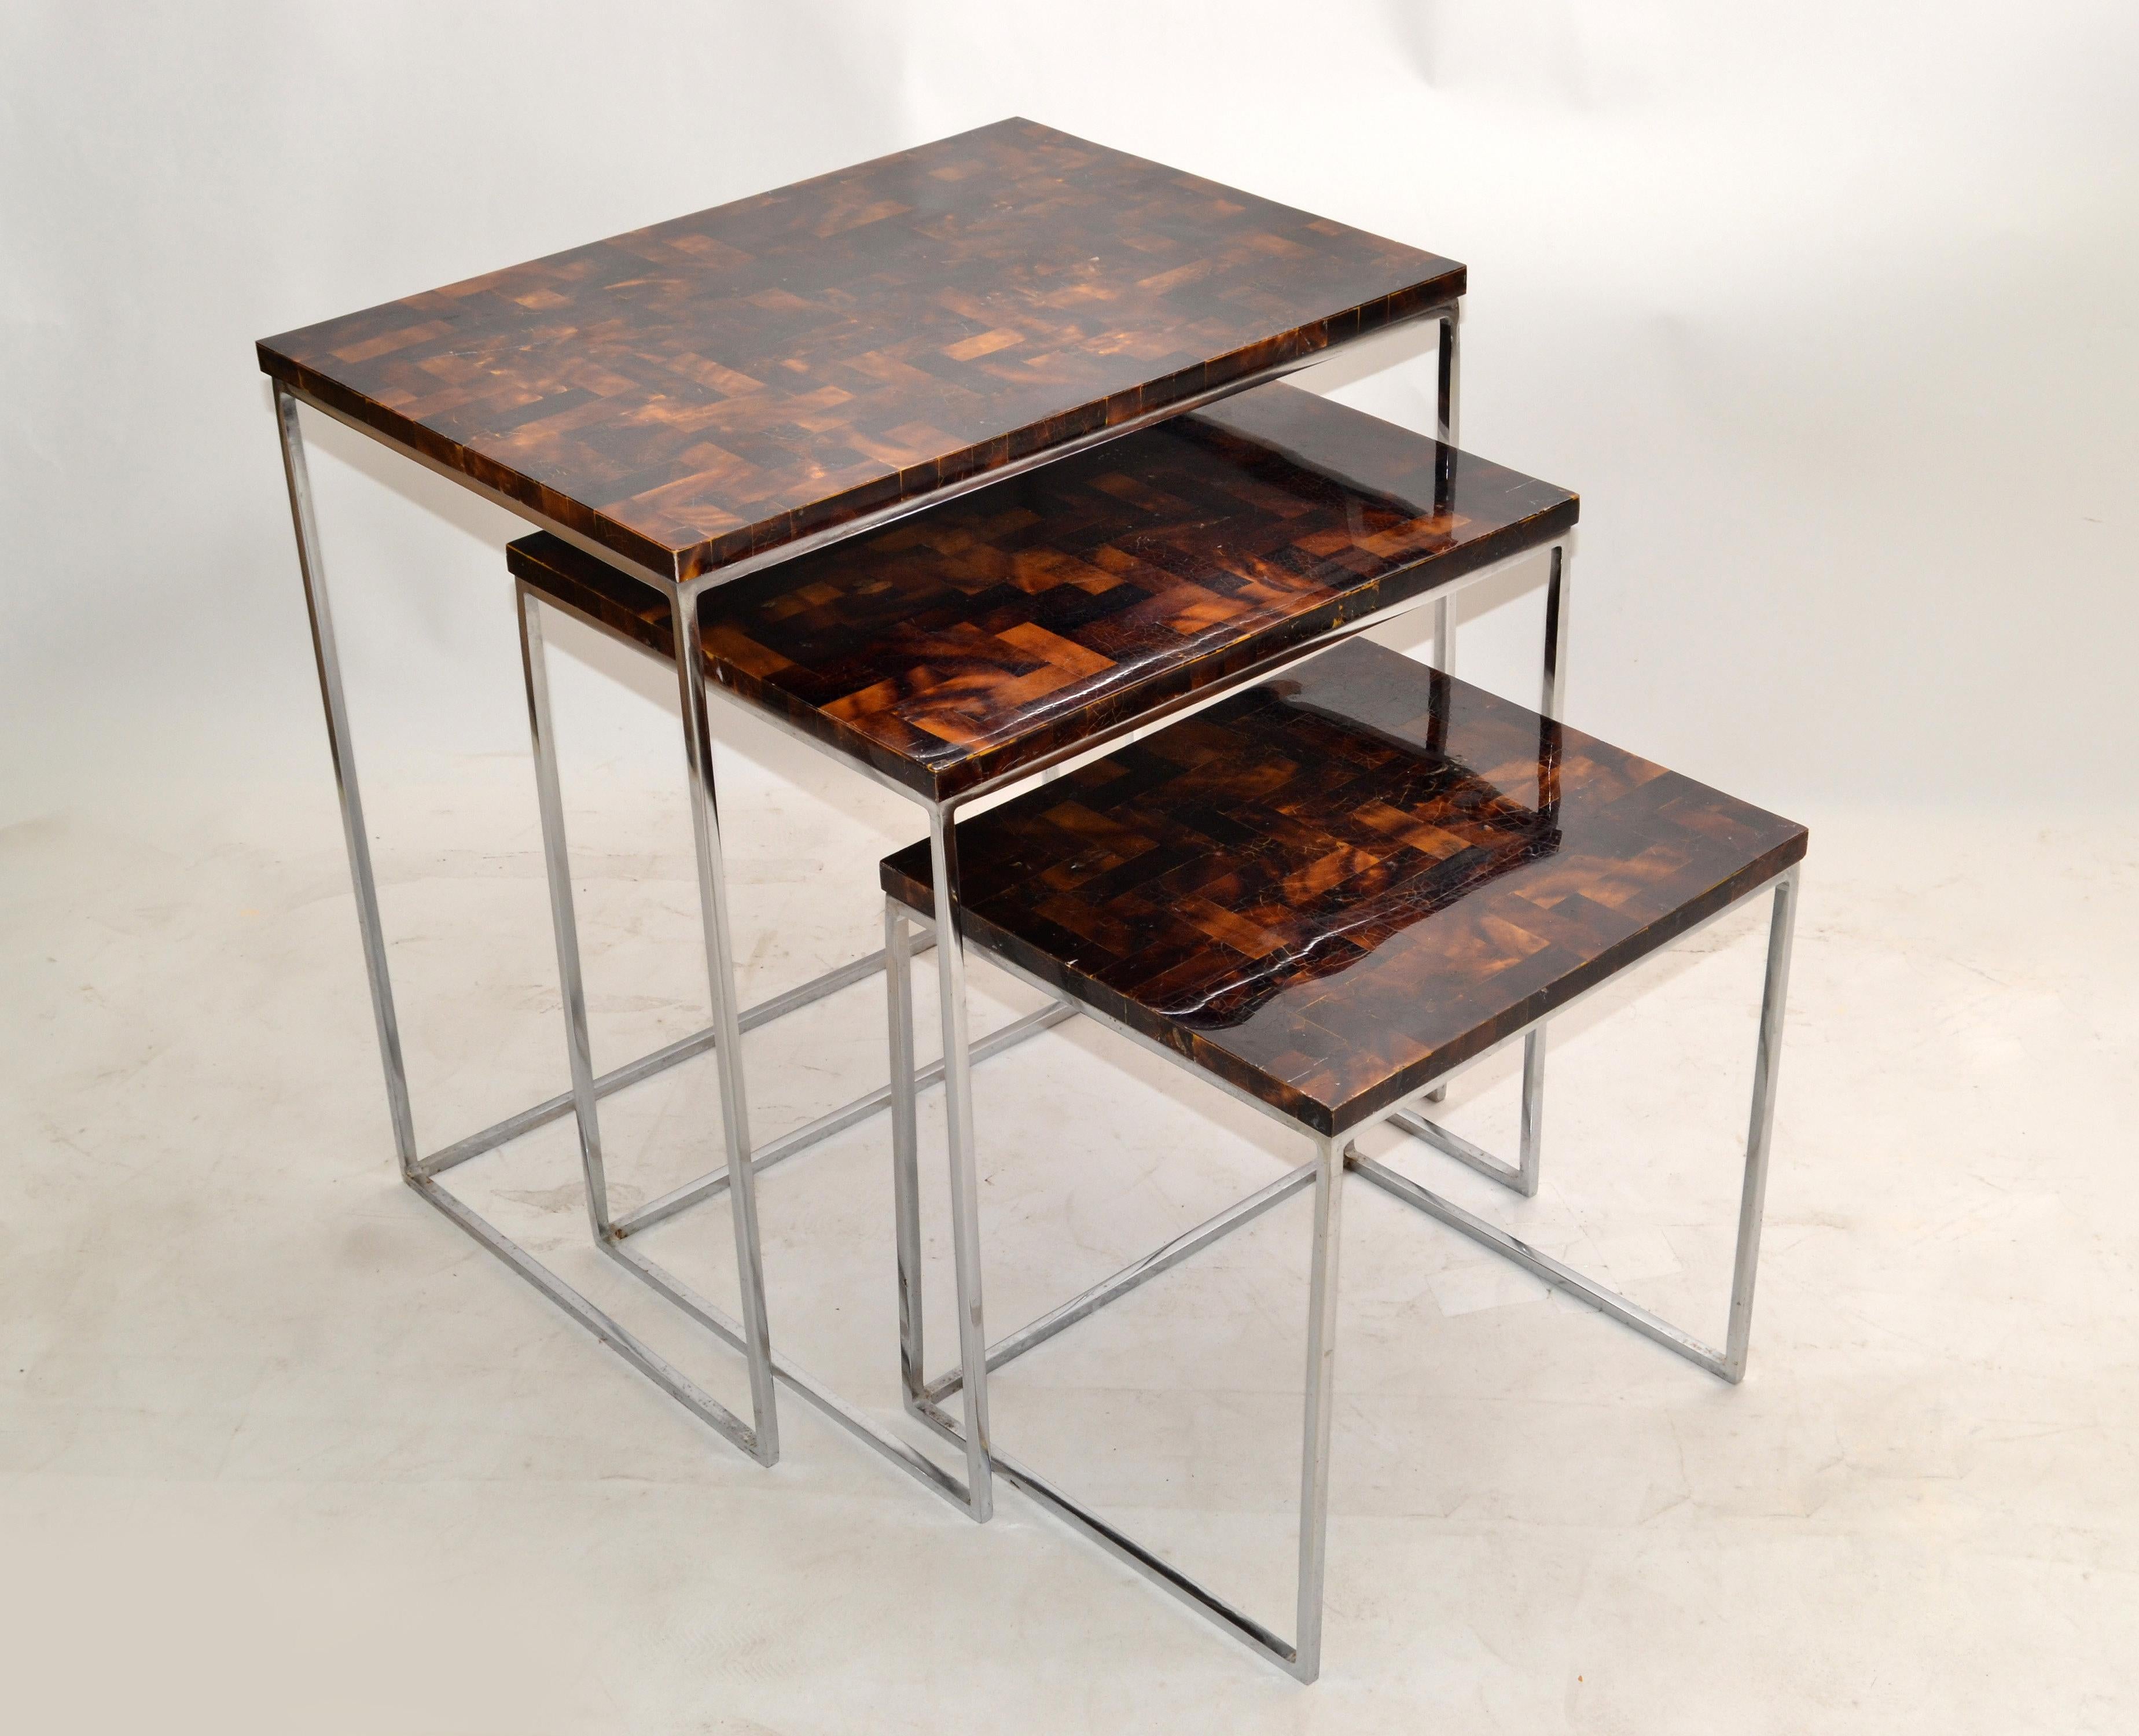 Asian modern chrome & handcrafted fossilized coconut top set of 3 nesting tables or stacking tables made by Palecek Furniture in the Philippines.
Restored condition and ready for a new Home.
Size of each table:
17.25 D x 24.25 L x 24.75 inches